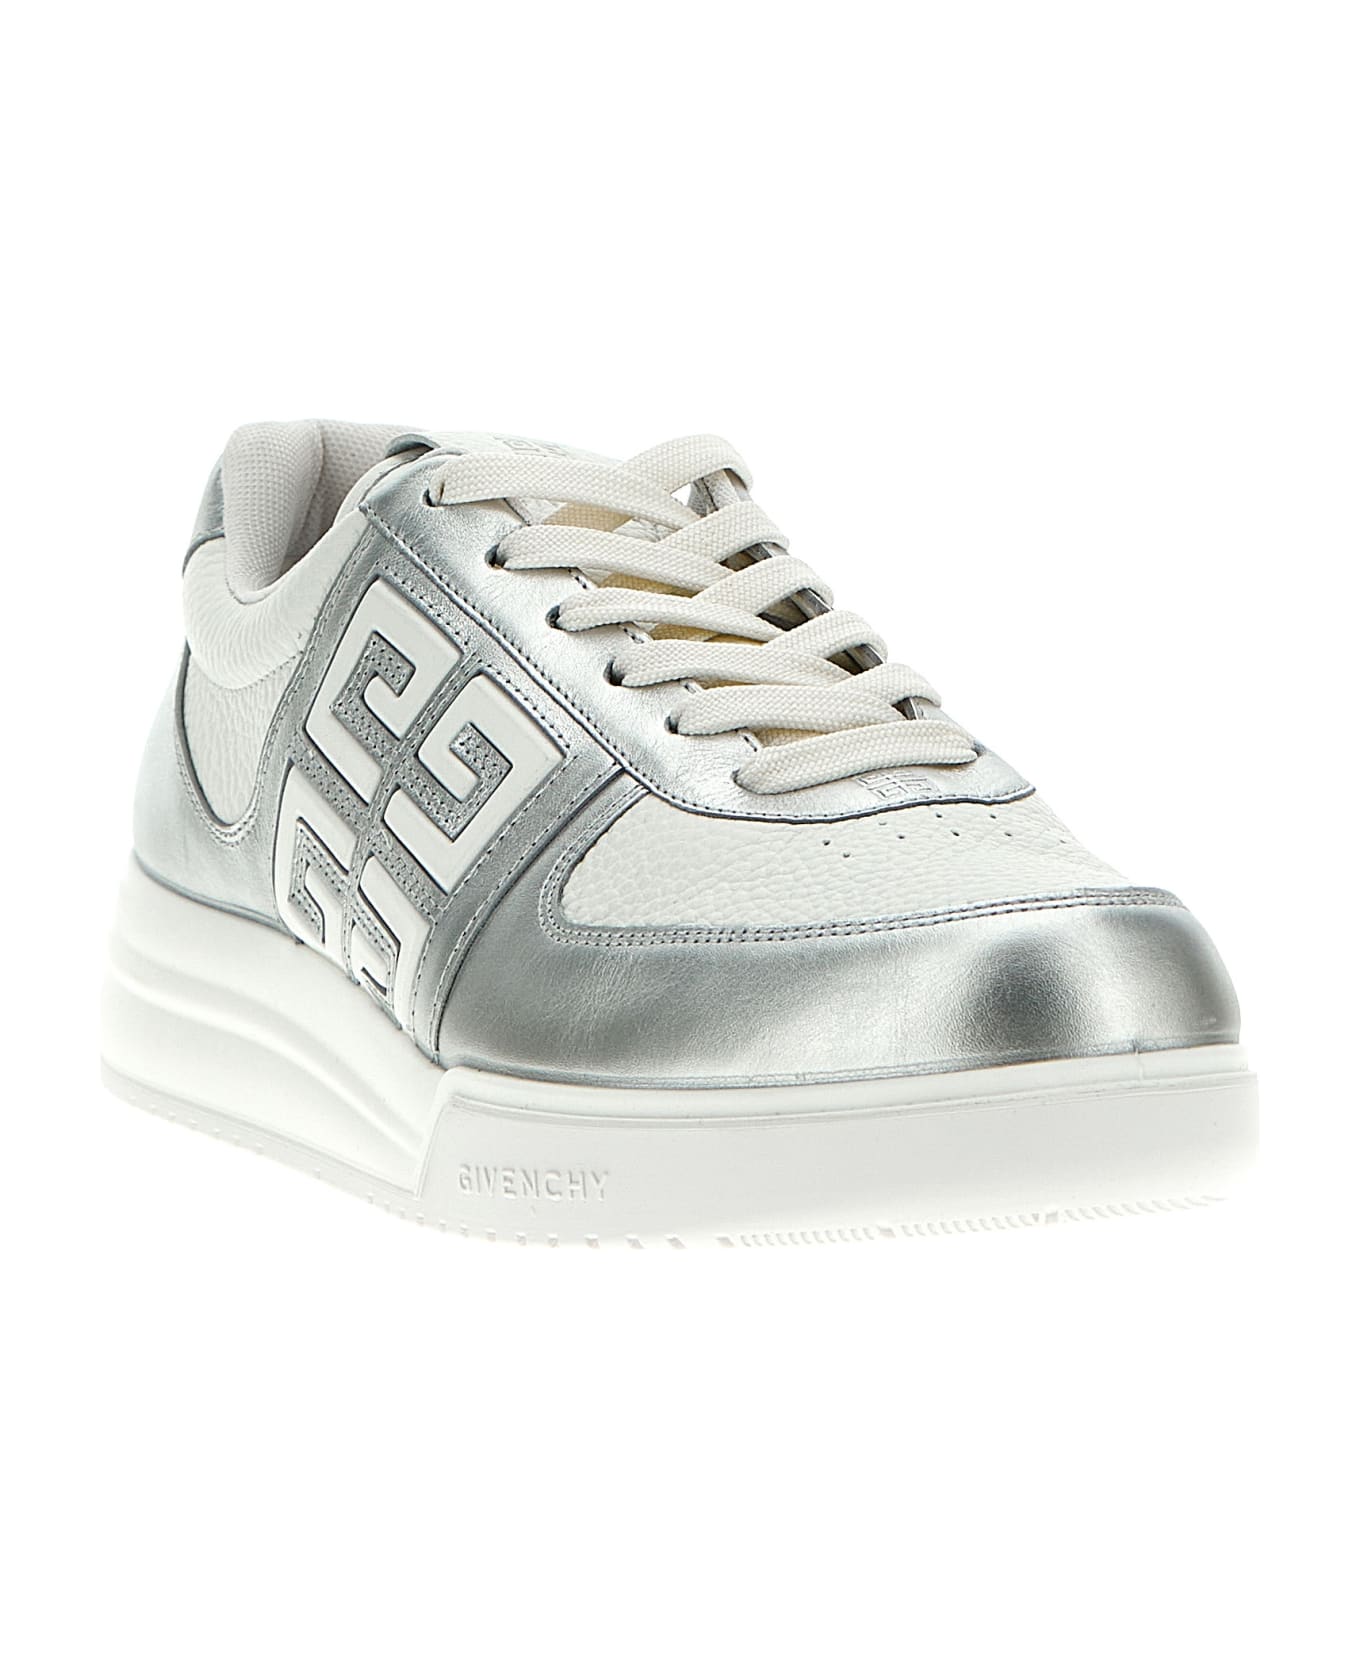 Givenchy G4 Low-top Sneaker - SILVER